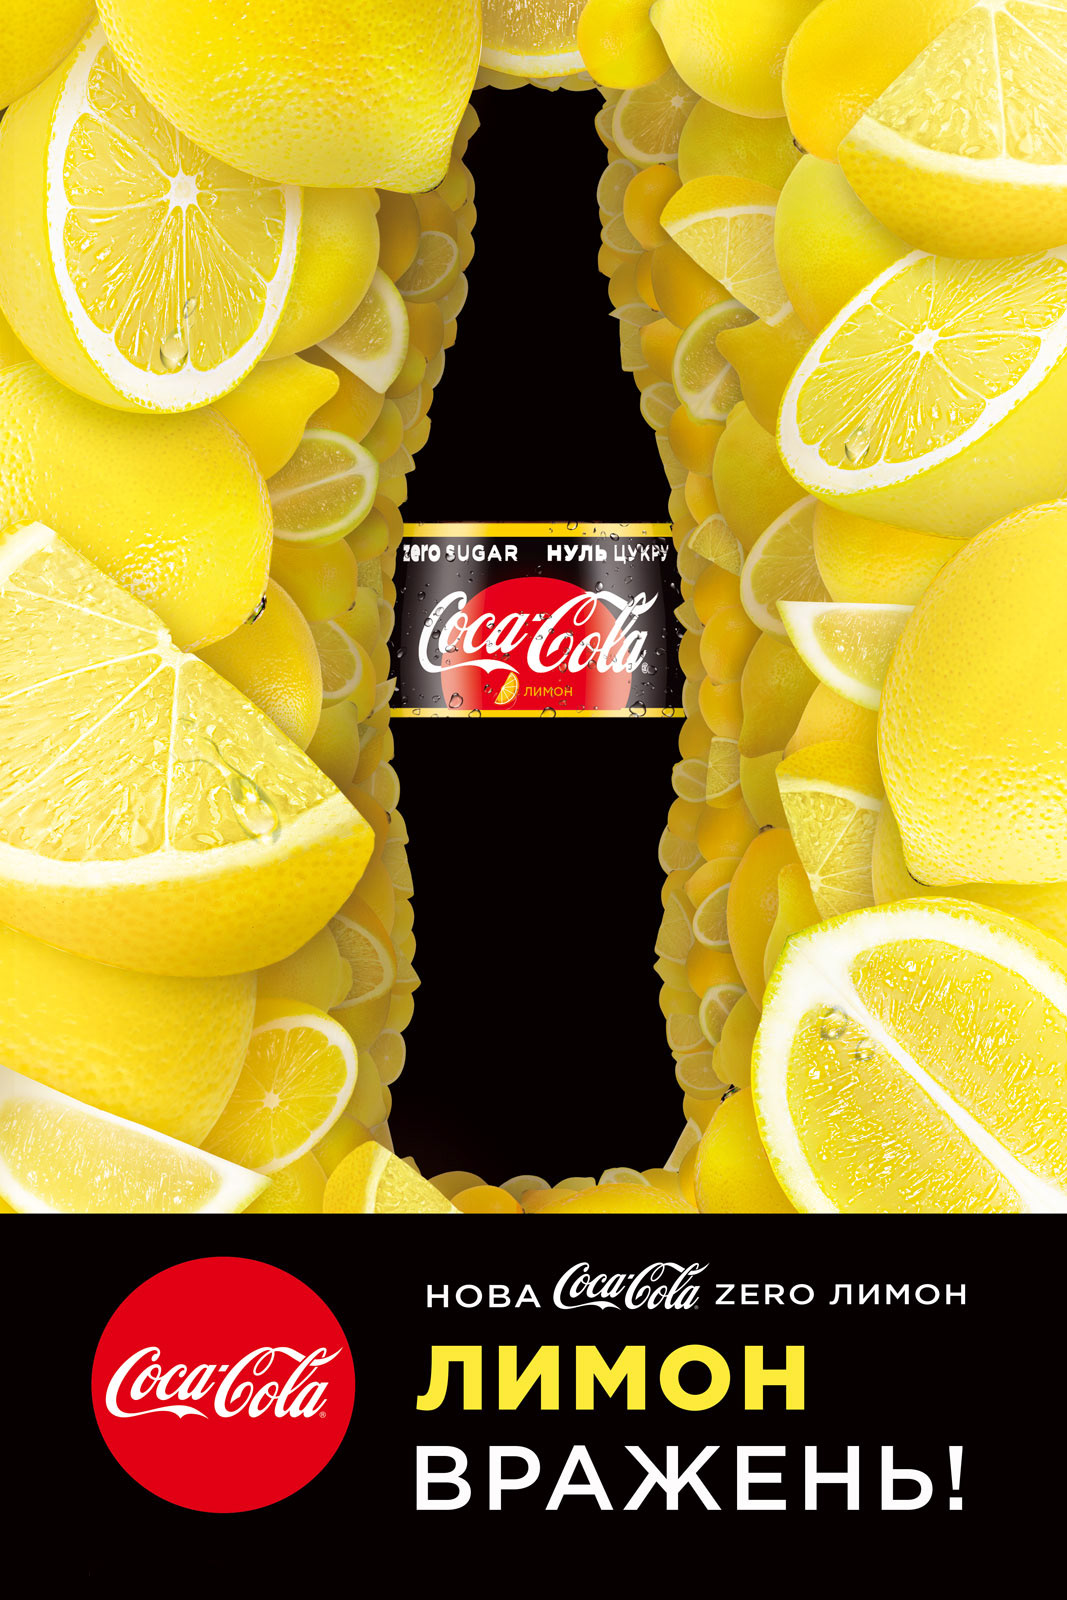 in the middle of nowhere fight hiking Coca Cola Zero Lemon on Behance